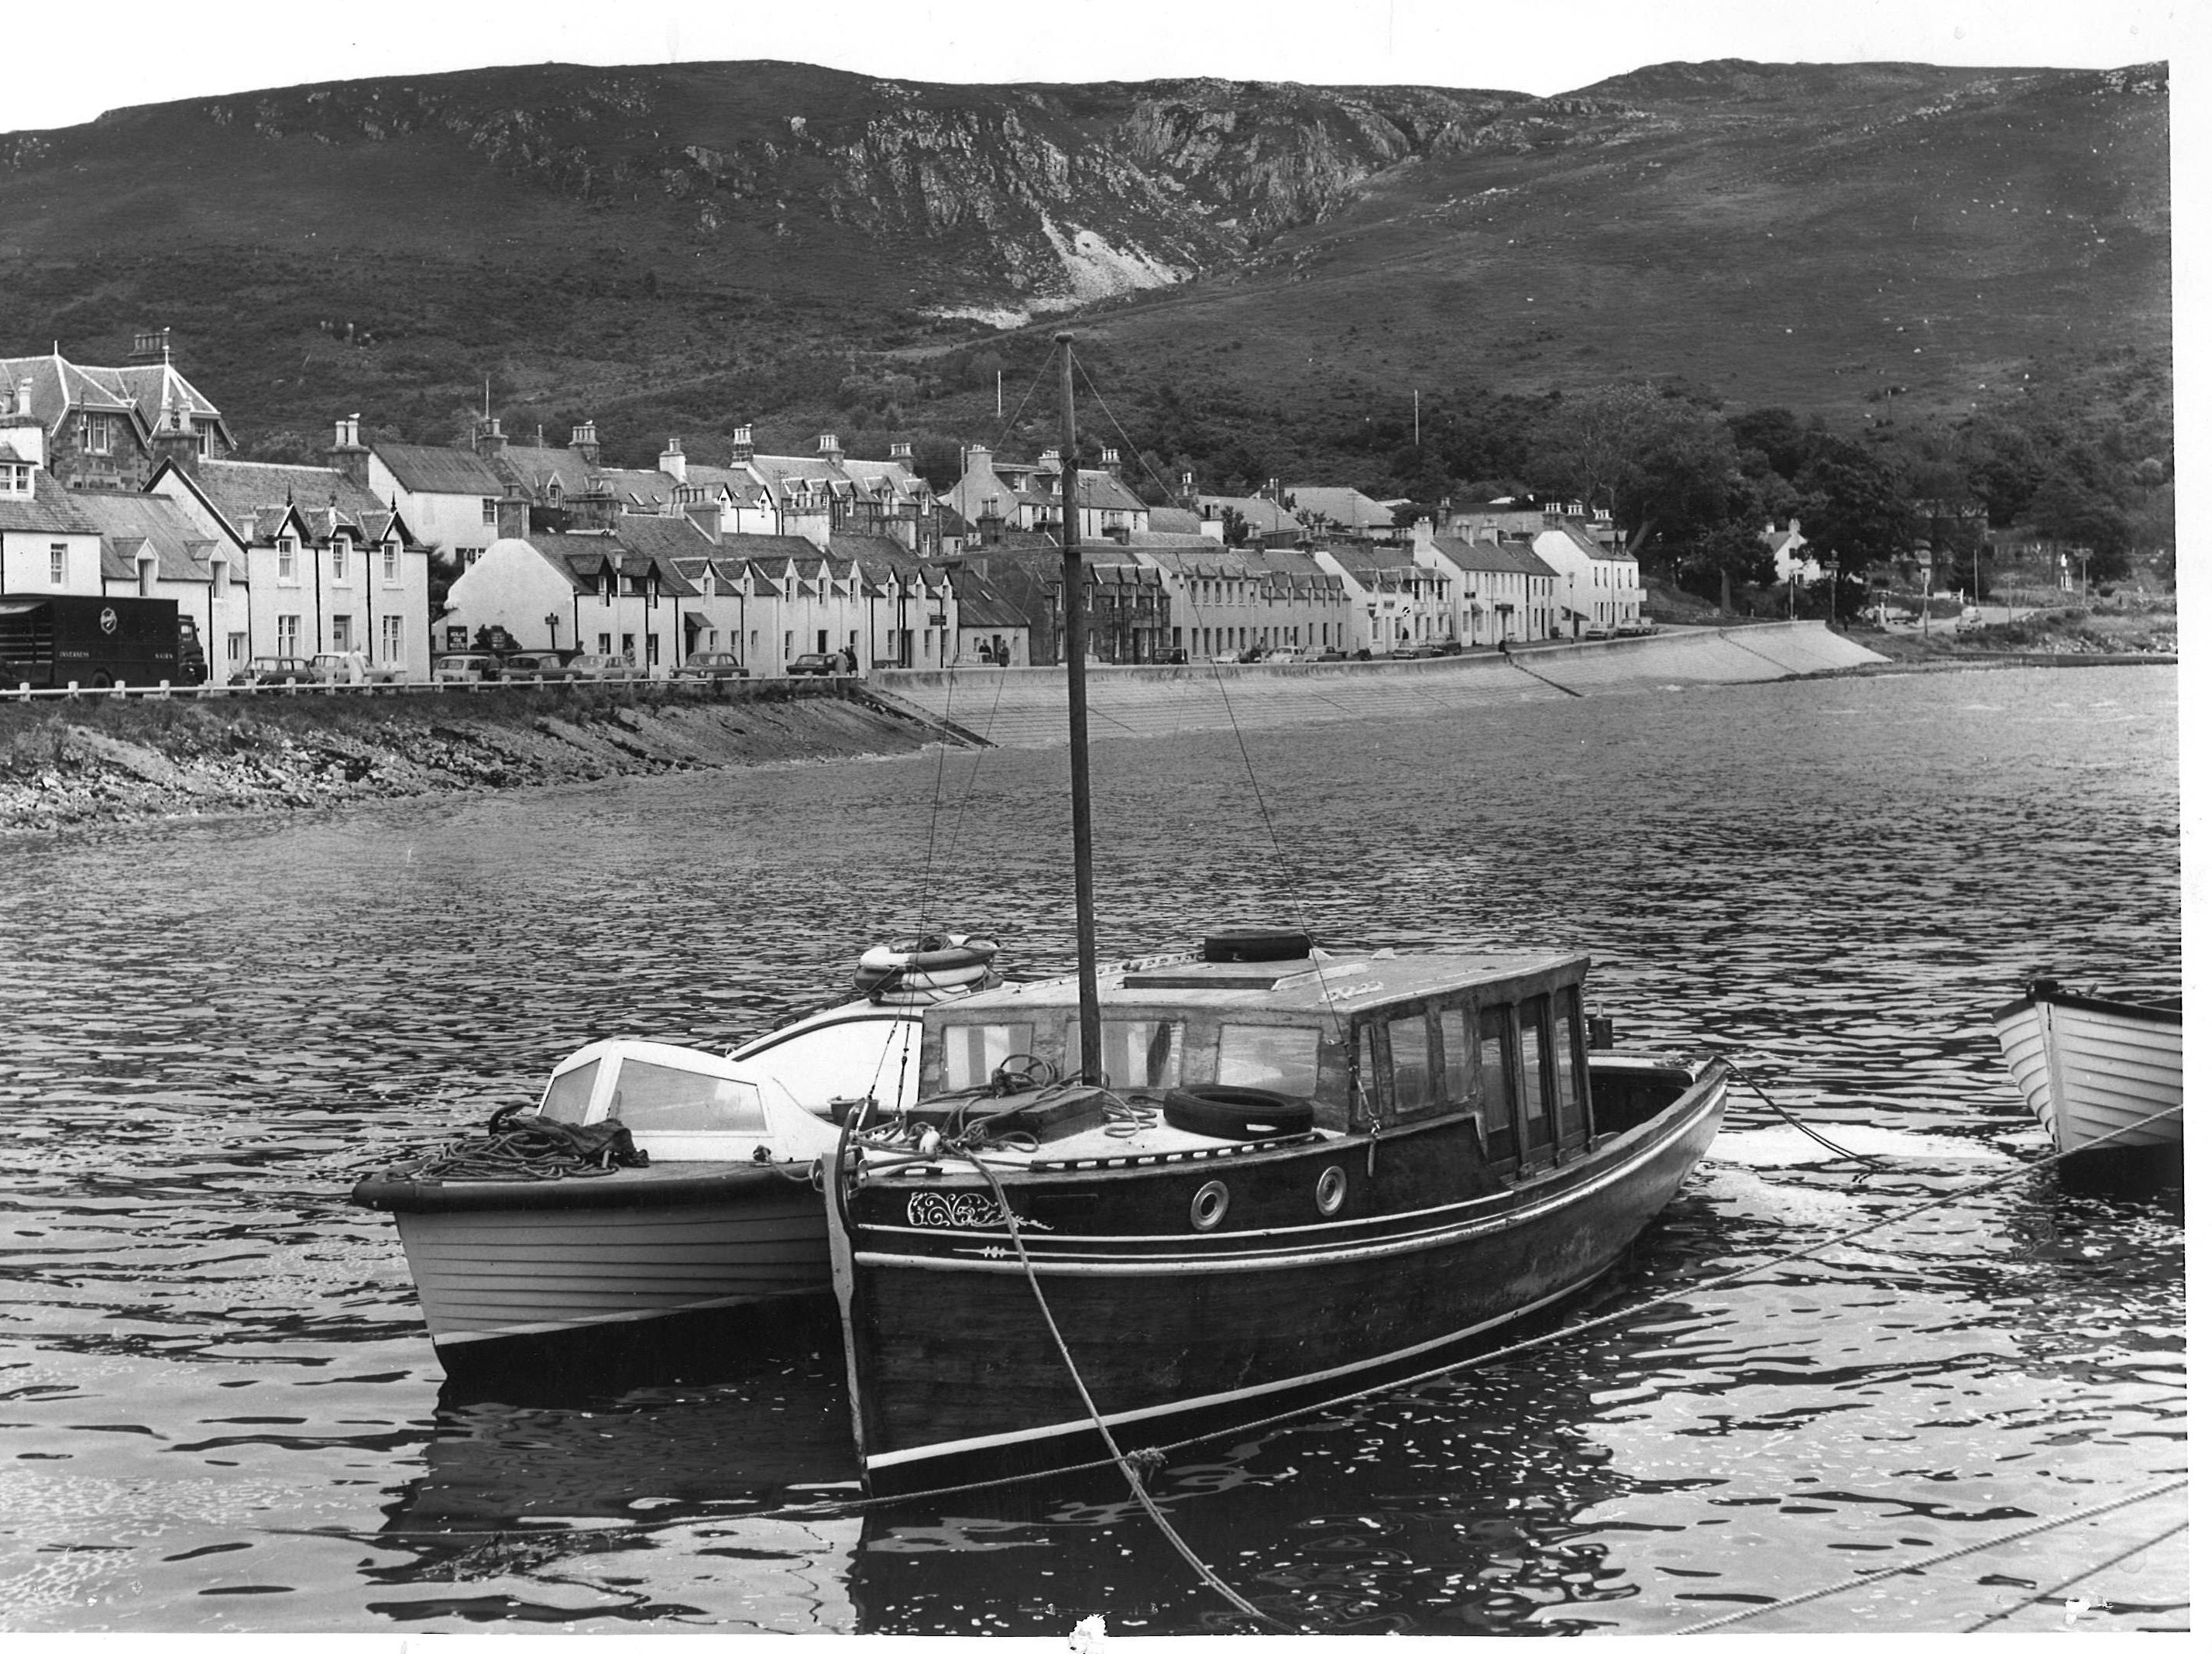 Pleasure boats ride at anchor in the quiet waters of Loch Broom with Shore Street in the background.